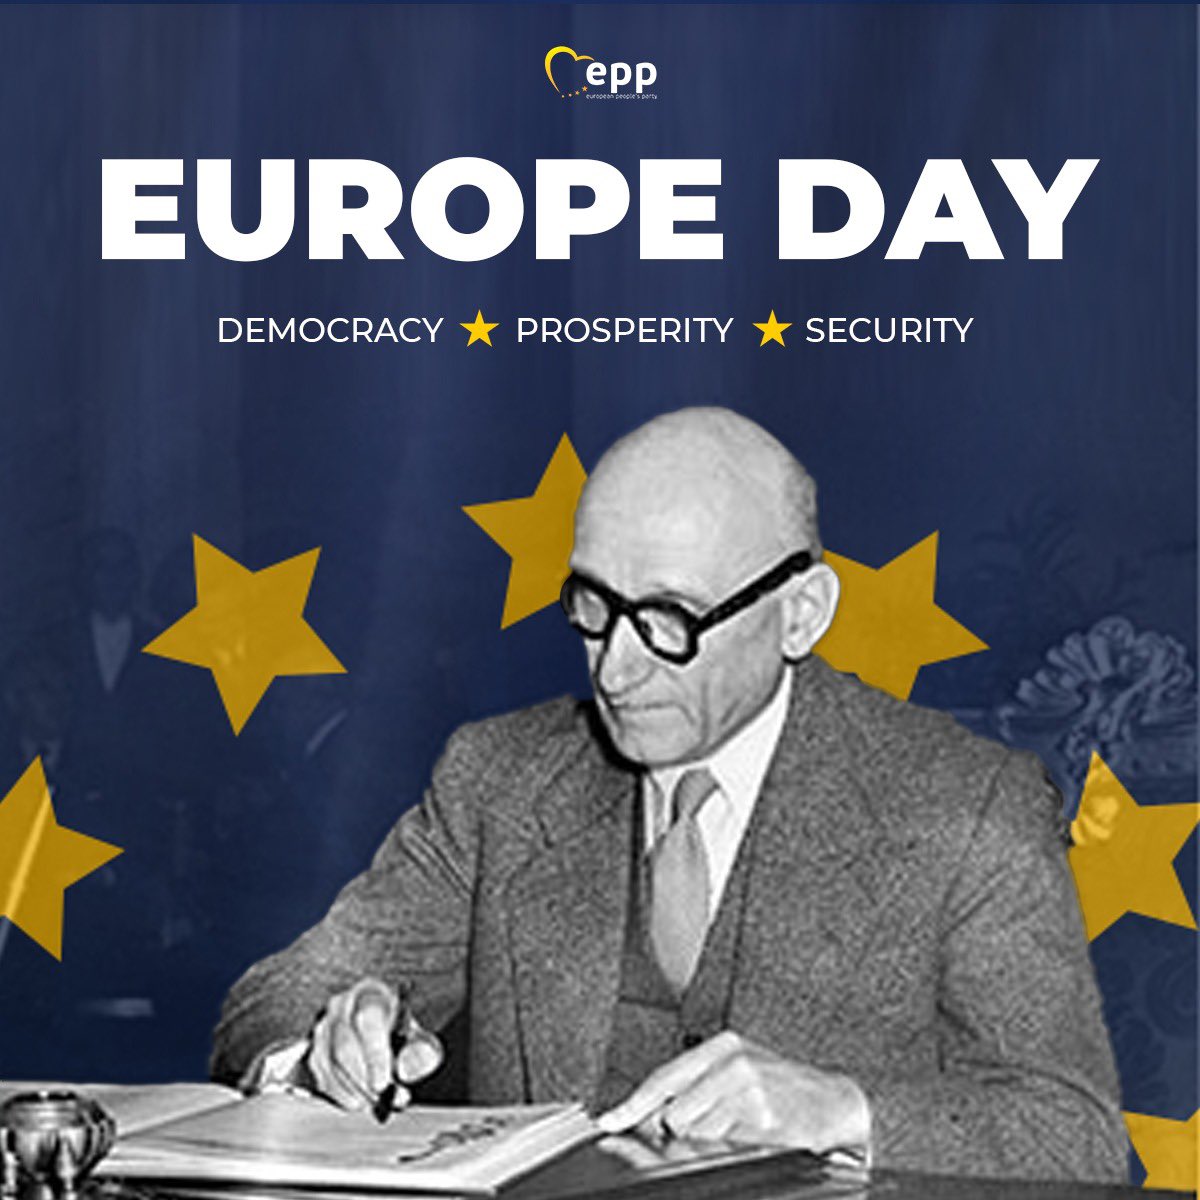 On #EuropeDay, we honour the vision of Robert Schuman, a great statesman who laid the foundations of our Union. Today, we must stay the course he showed us, more united than ever in a changing world. For a more prosperous, more secure, more democratic Europe.